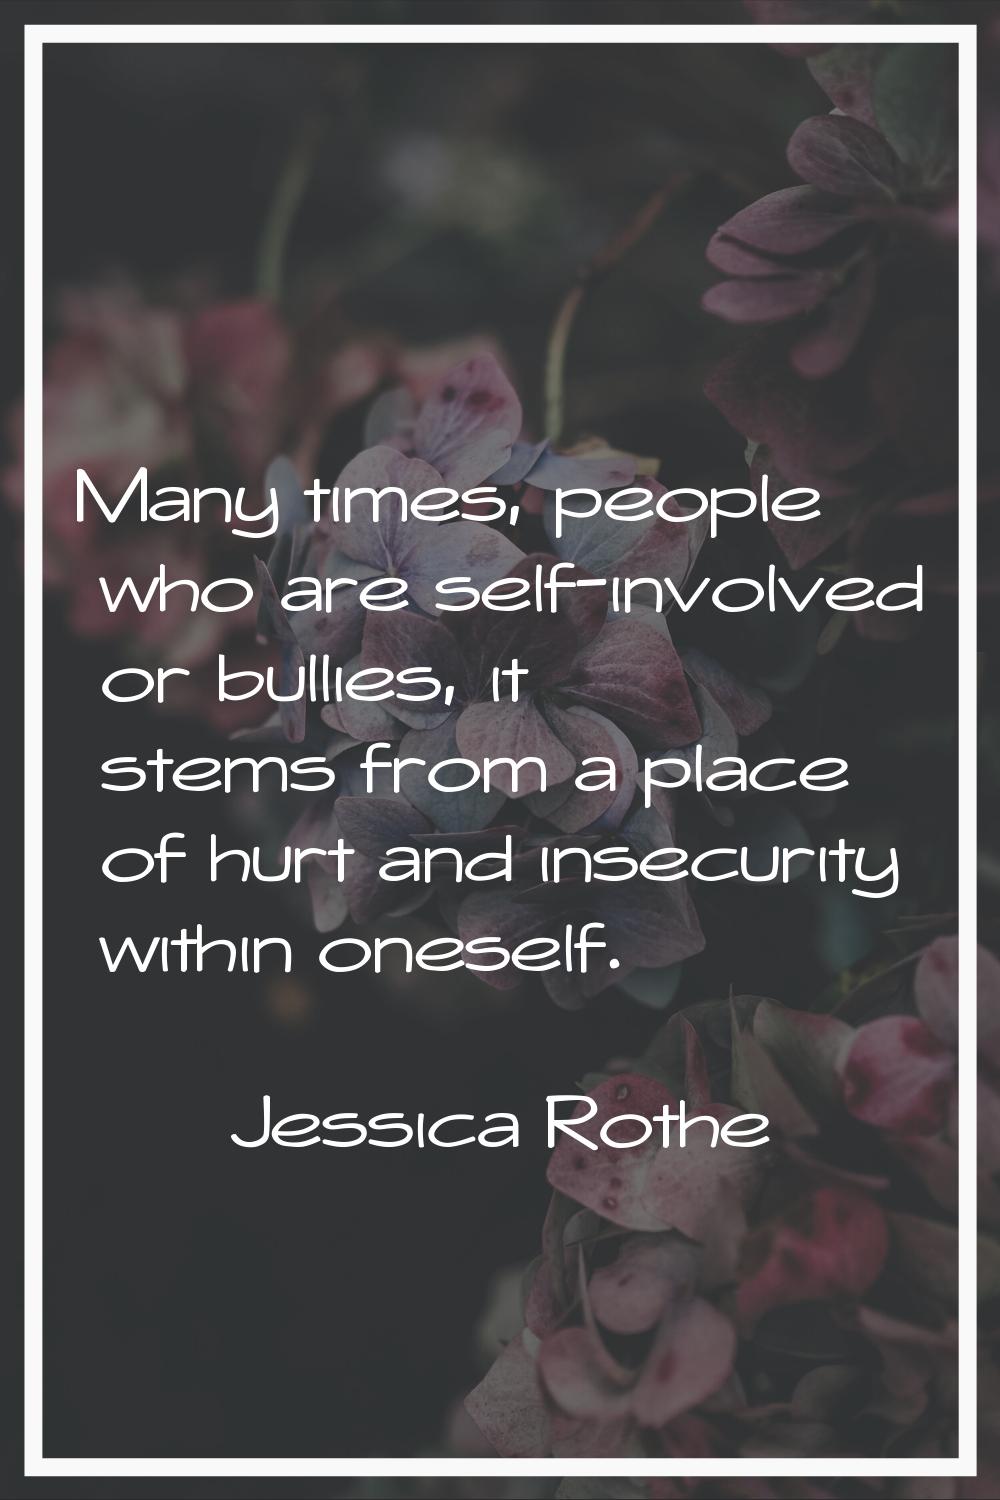 Many times, people who are self-involved or bullies, it stems from a place of hurt and insecurity w